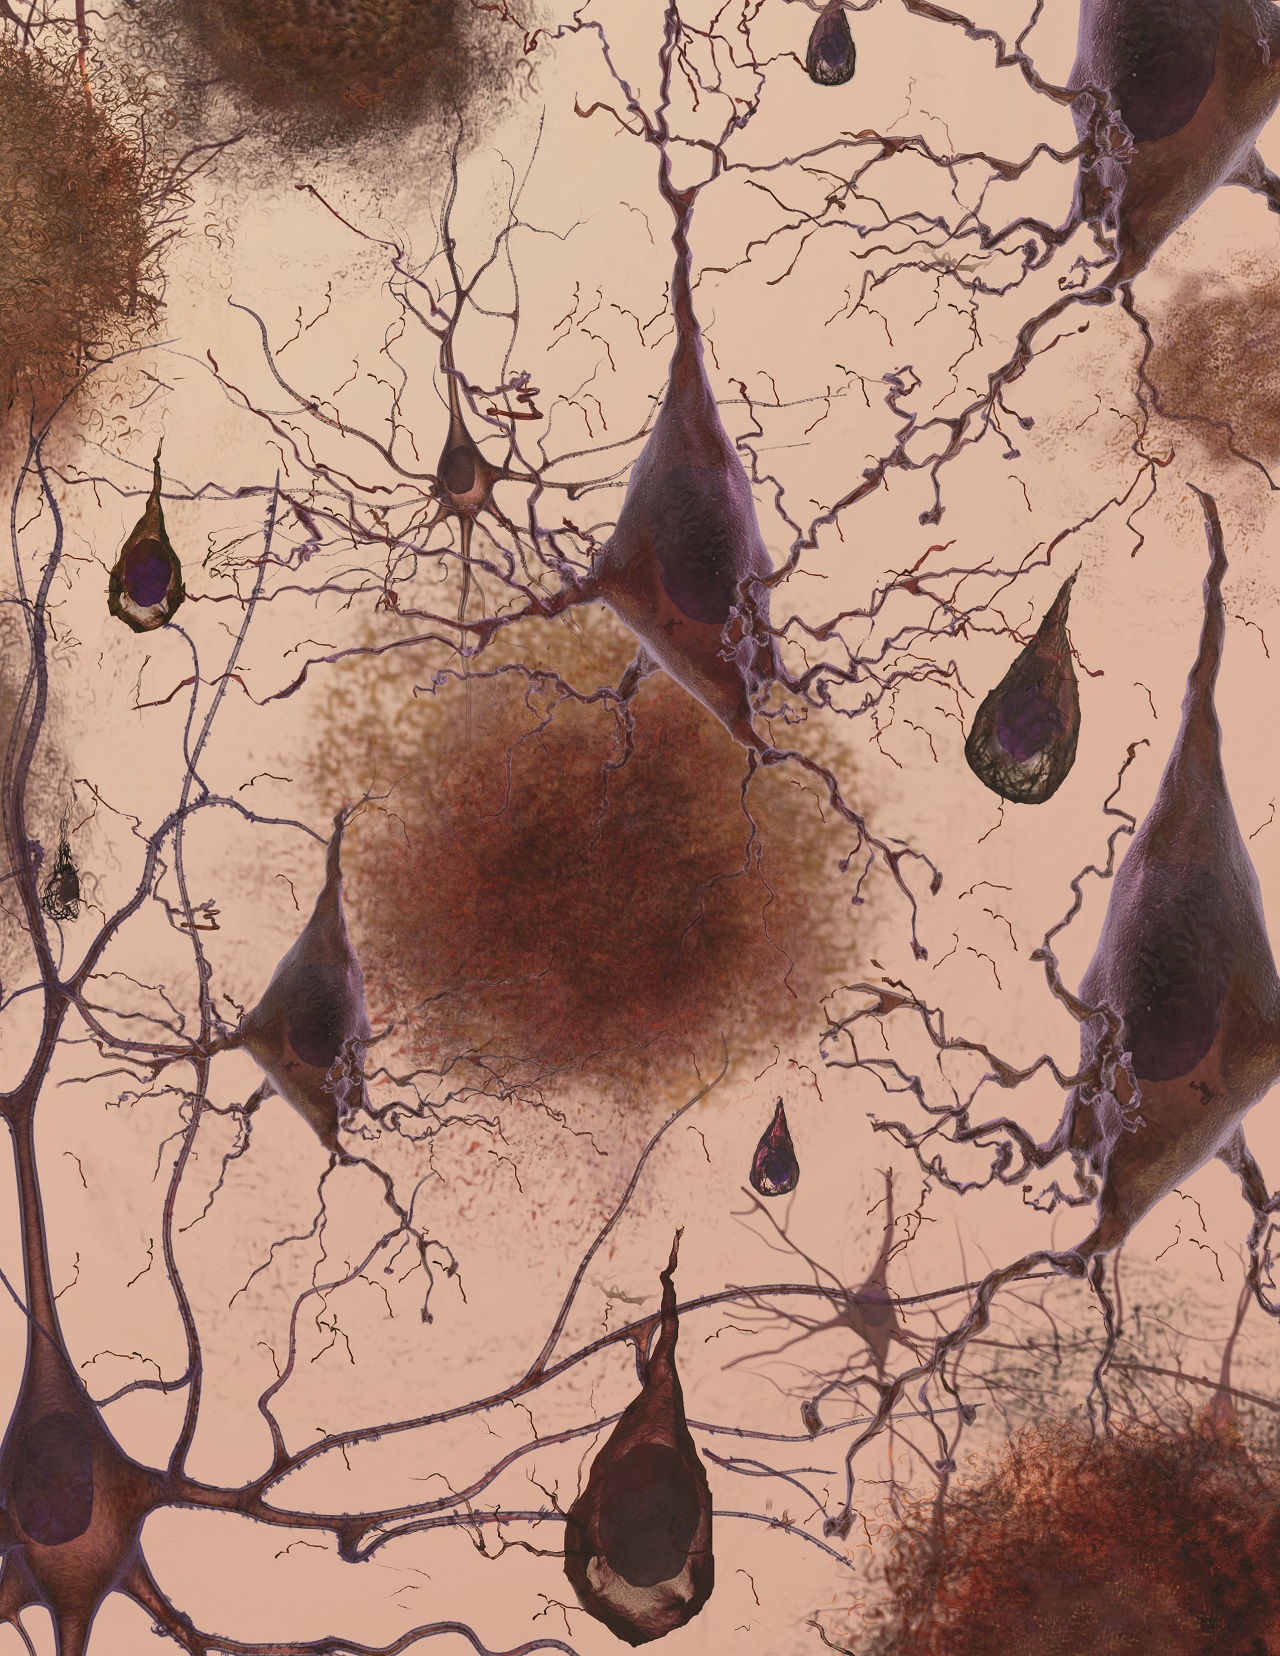 Loss of connection between brain cells. Image Credit: National Institute on Aging/National Institutes of Health